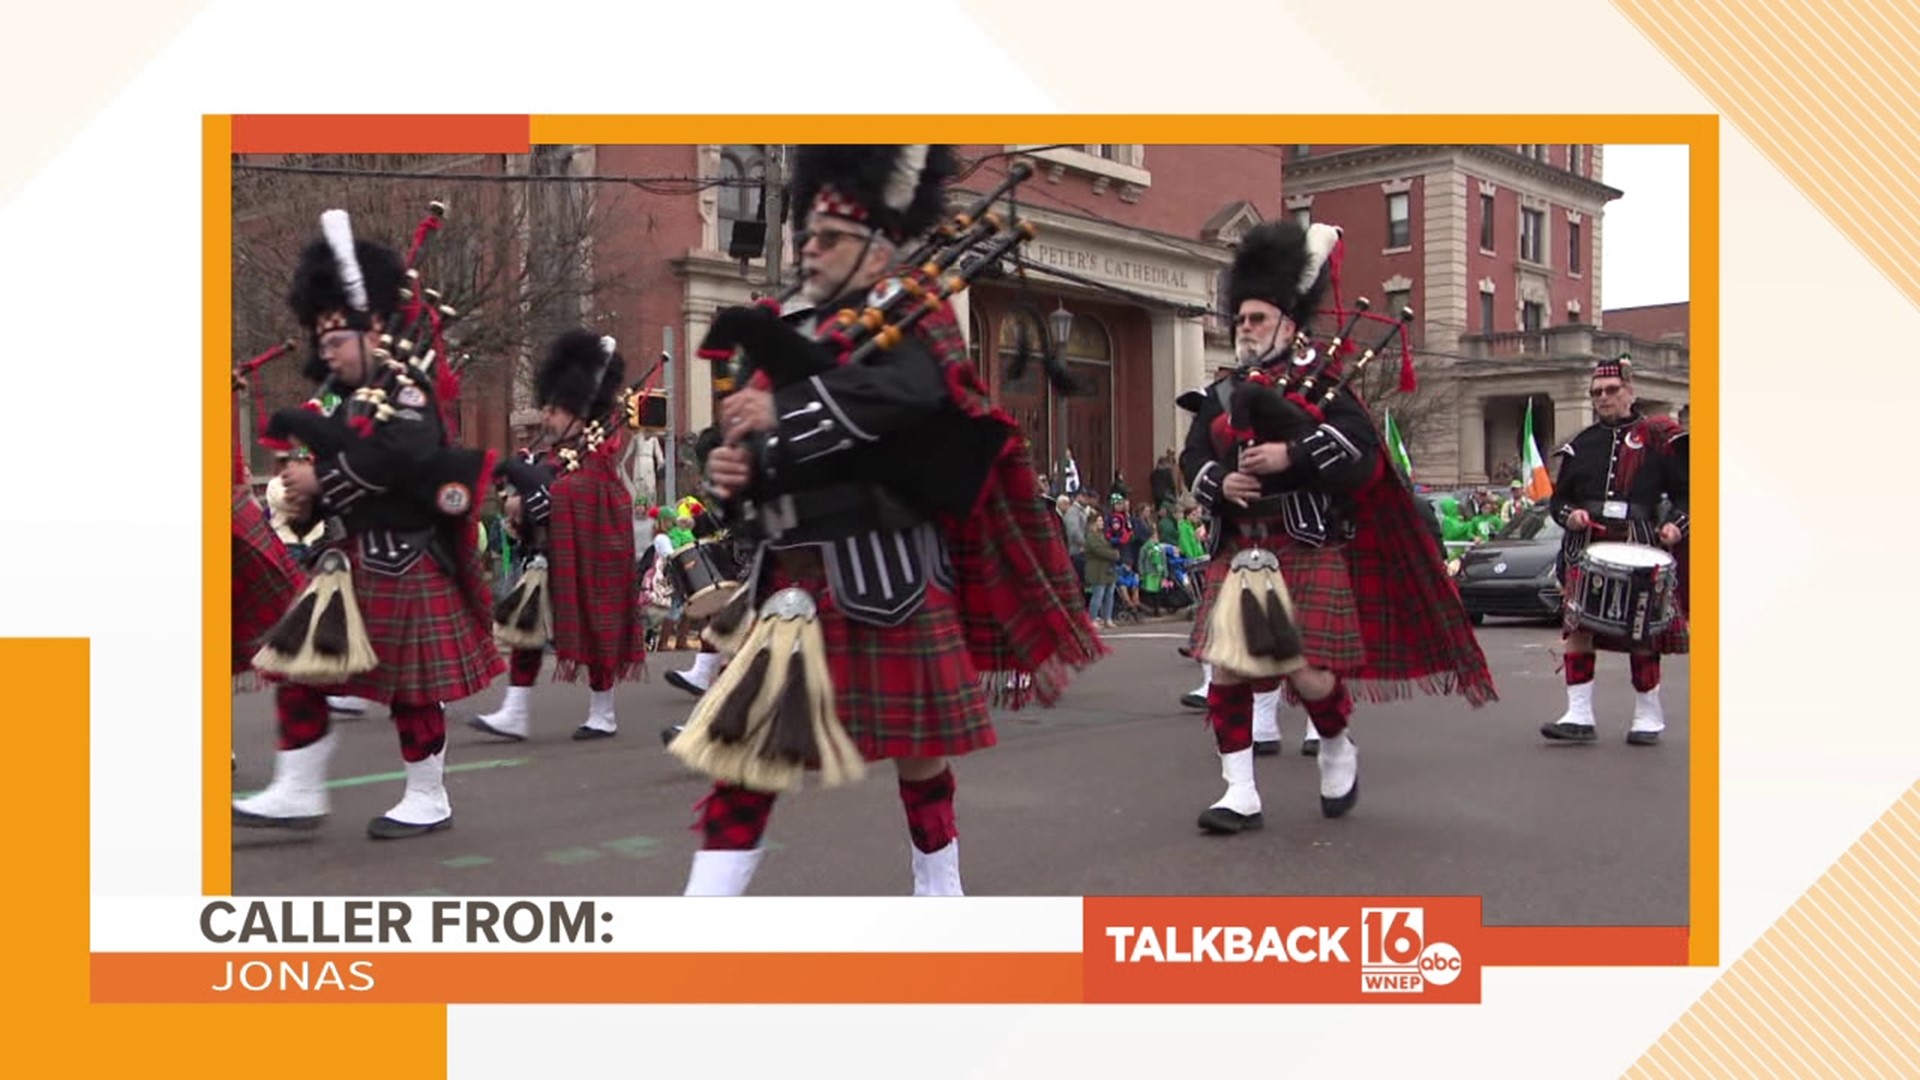 Callers are commenting on the Oscars, sports, and, of course, the many St. Patrick's Parades.